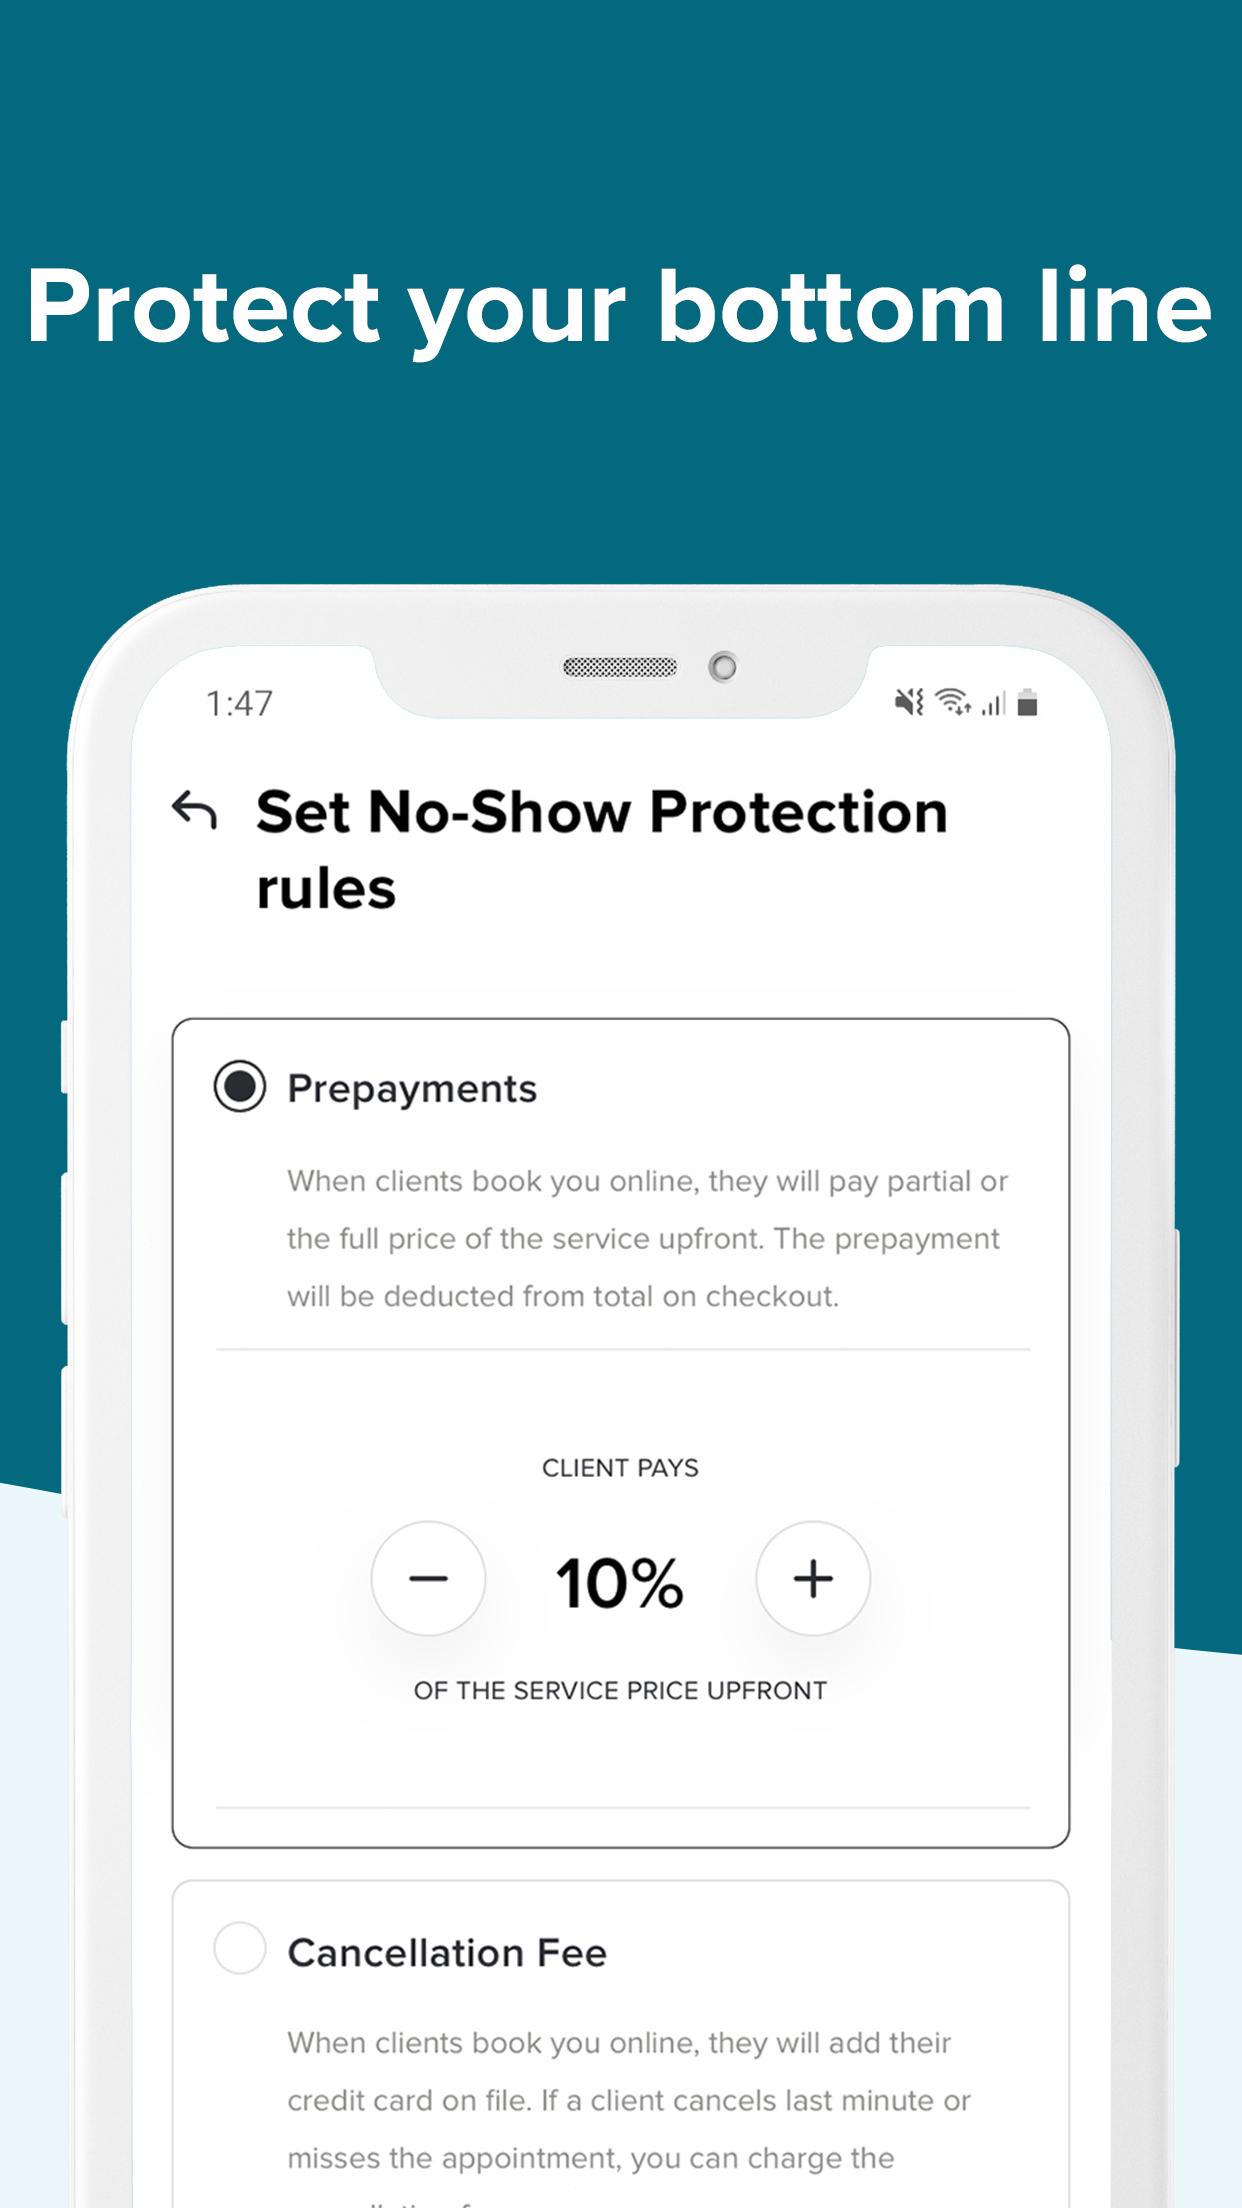 No-Show Protection